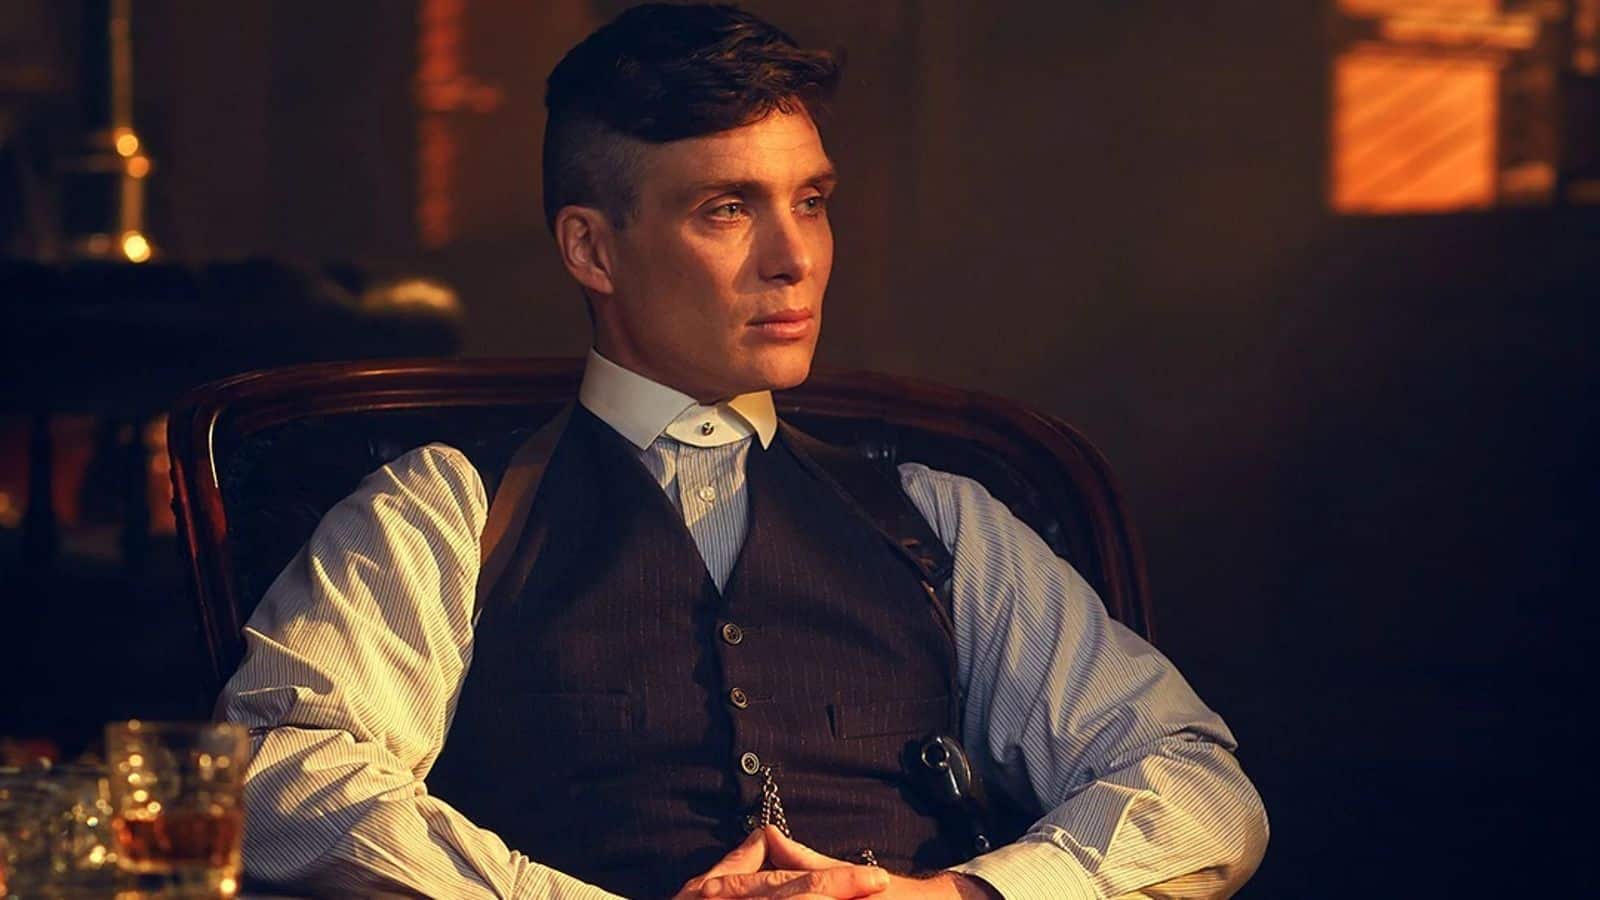 Cillian Murphy returning as Tommy Shelby in 'Peaky Blinders' film